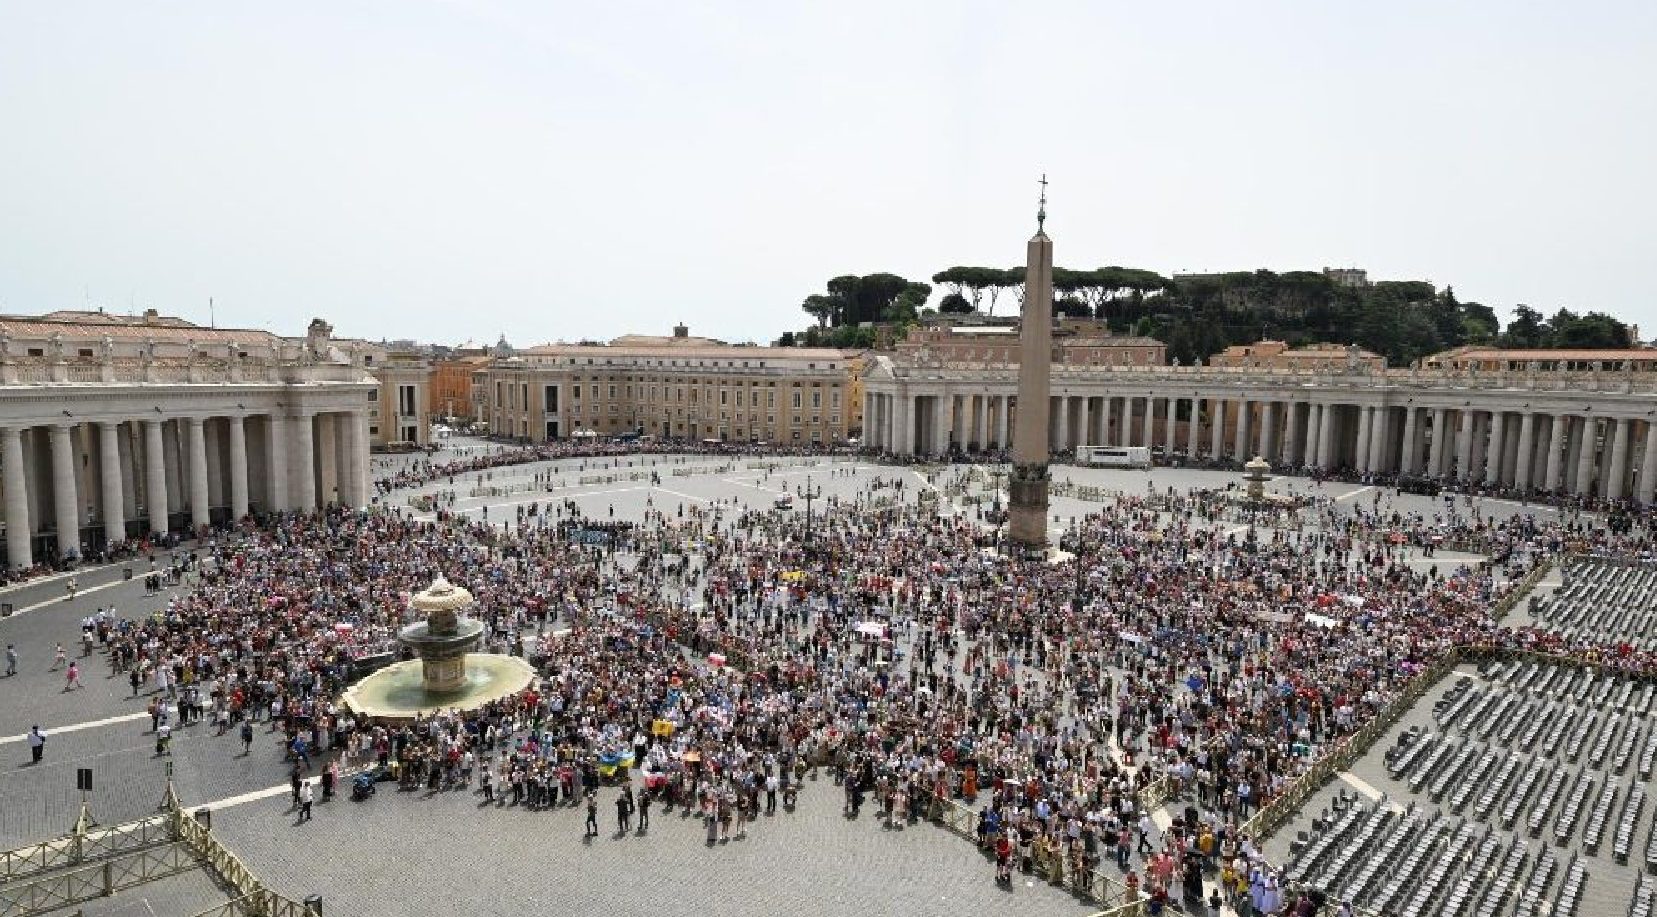 15,000 people gathered in St. Peter's Square at noon on Sunday, June 9, to join the Pope